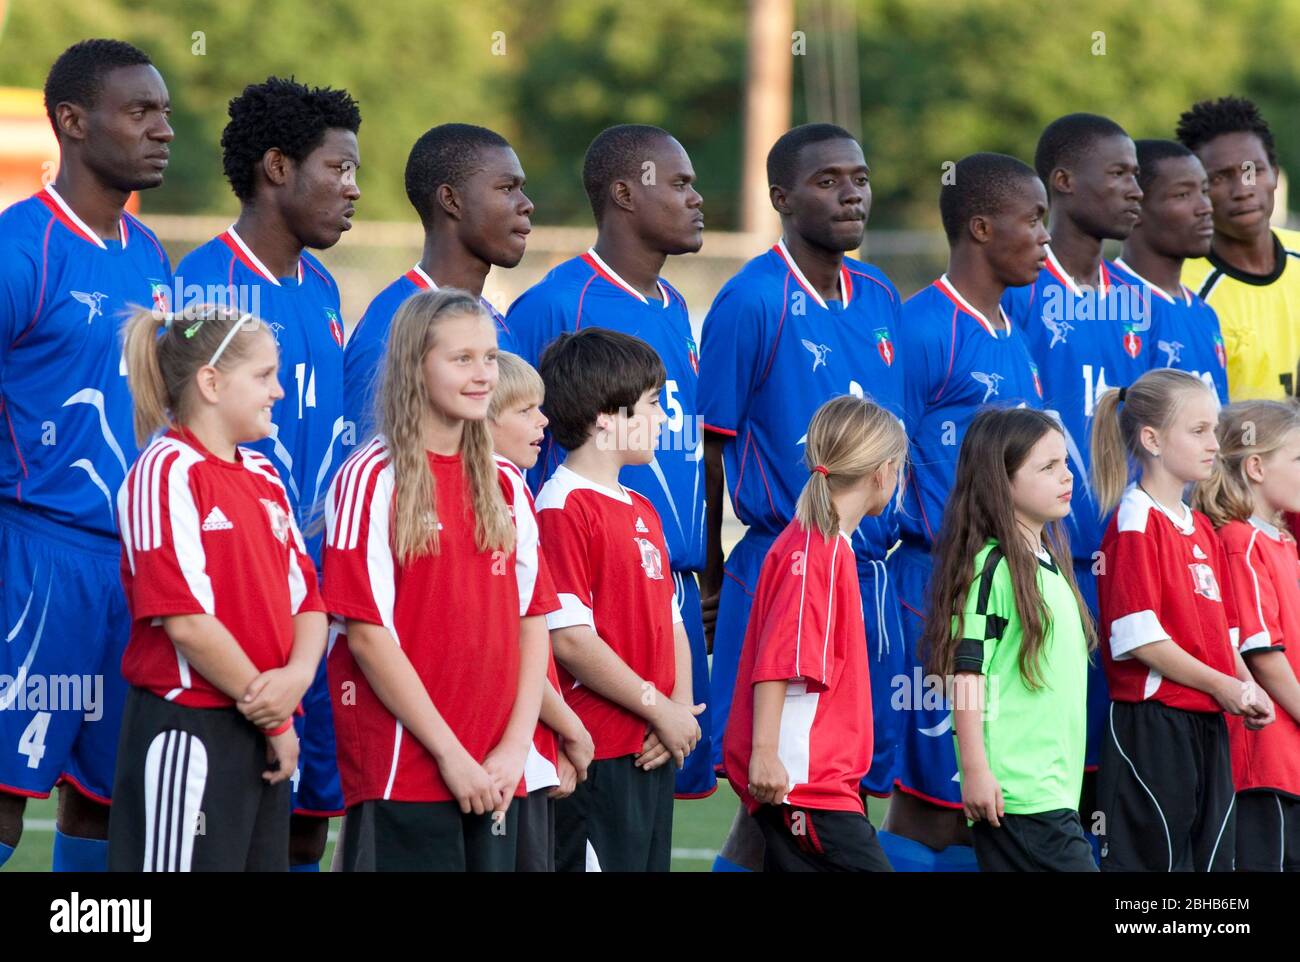 Austin, Texas USA, April 28, 2010: Schoolchildren stand with members of the Haitian national soccer team at an exhibition match with the Austin Aztek professional soccer team. The Haitians' Port au Prince facility was decimated by the January 12th earthquake and 32 team members were killed. The surviving team members accepted an offer to train for two weeks in Texas and will travel to Argentina next week for South American matchups.  ©Bob Daemmrich Stock Photo